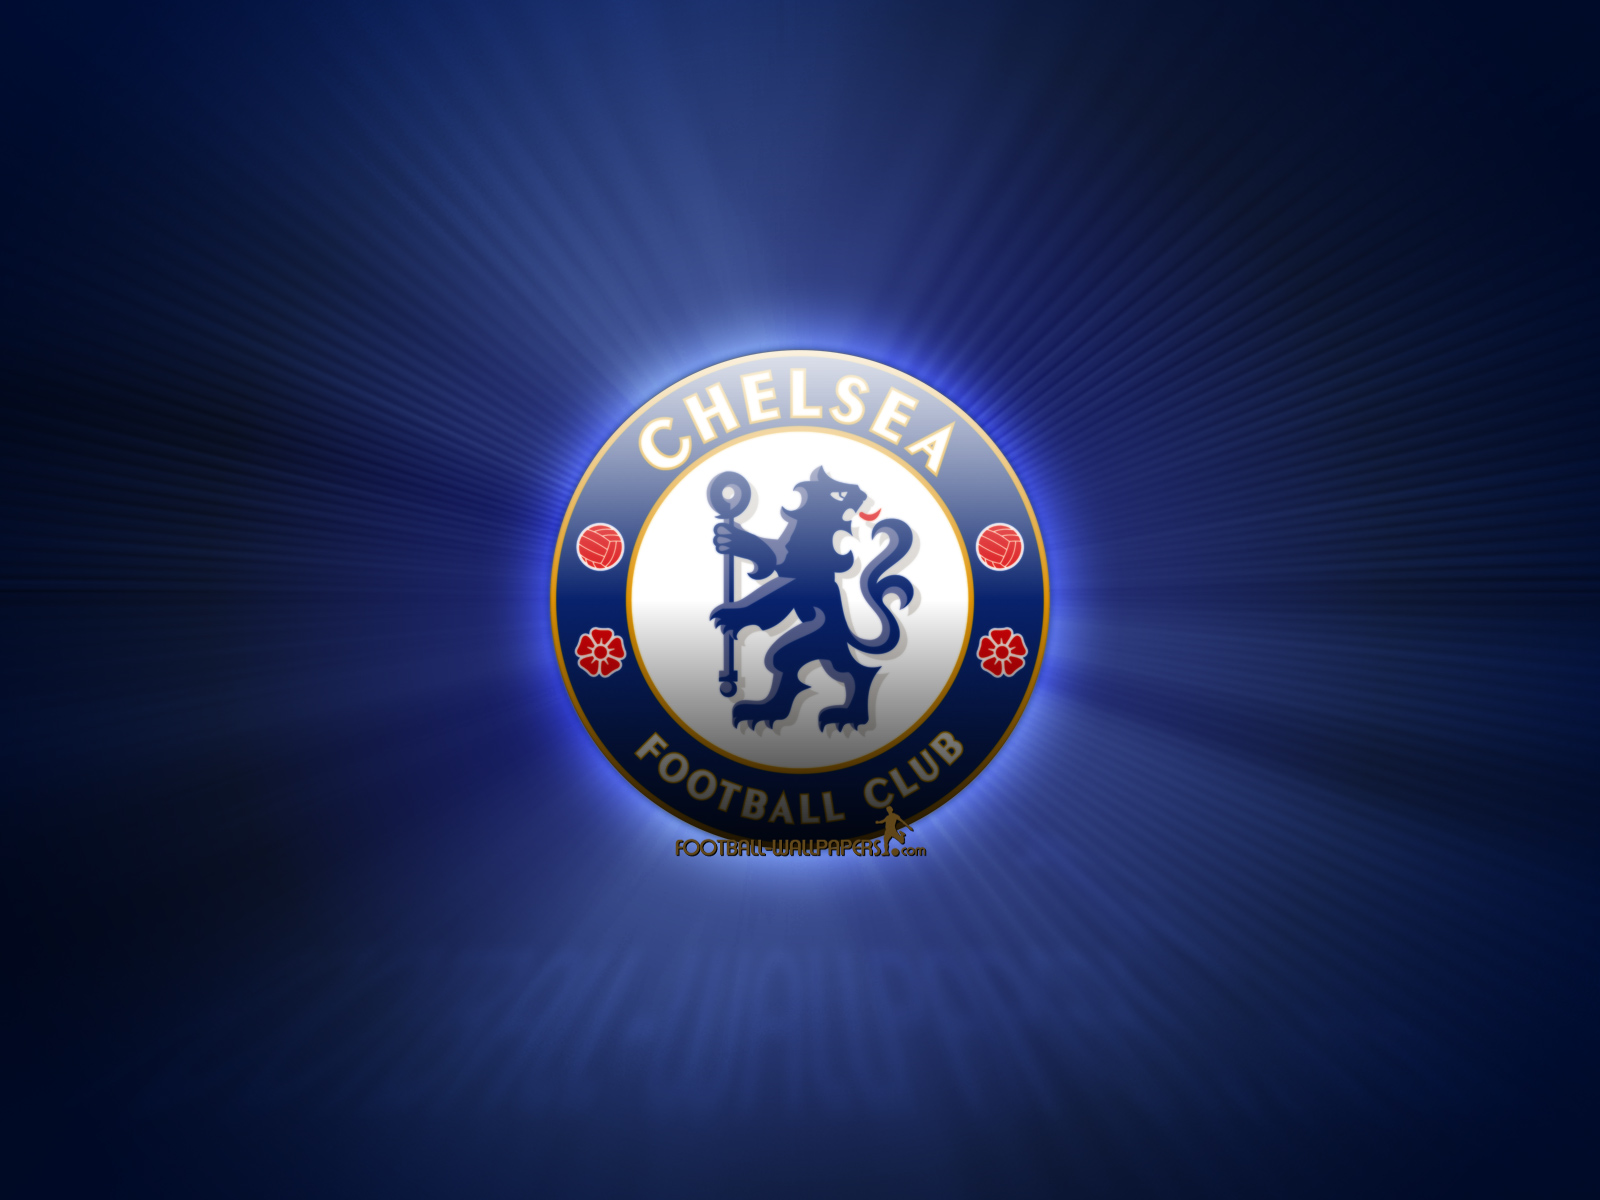 All About Chelsea Football Club | The Power Of Sport and games